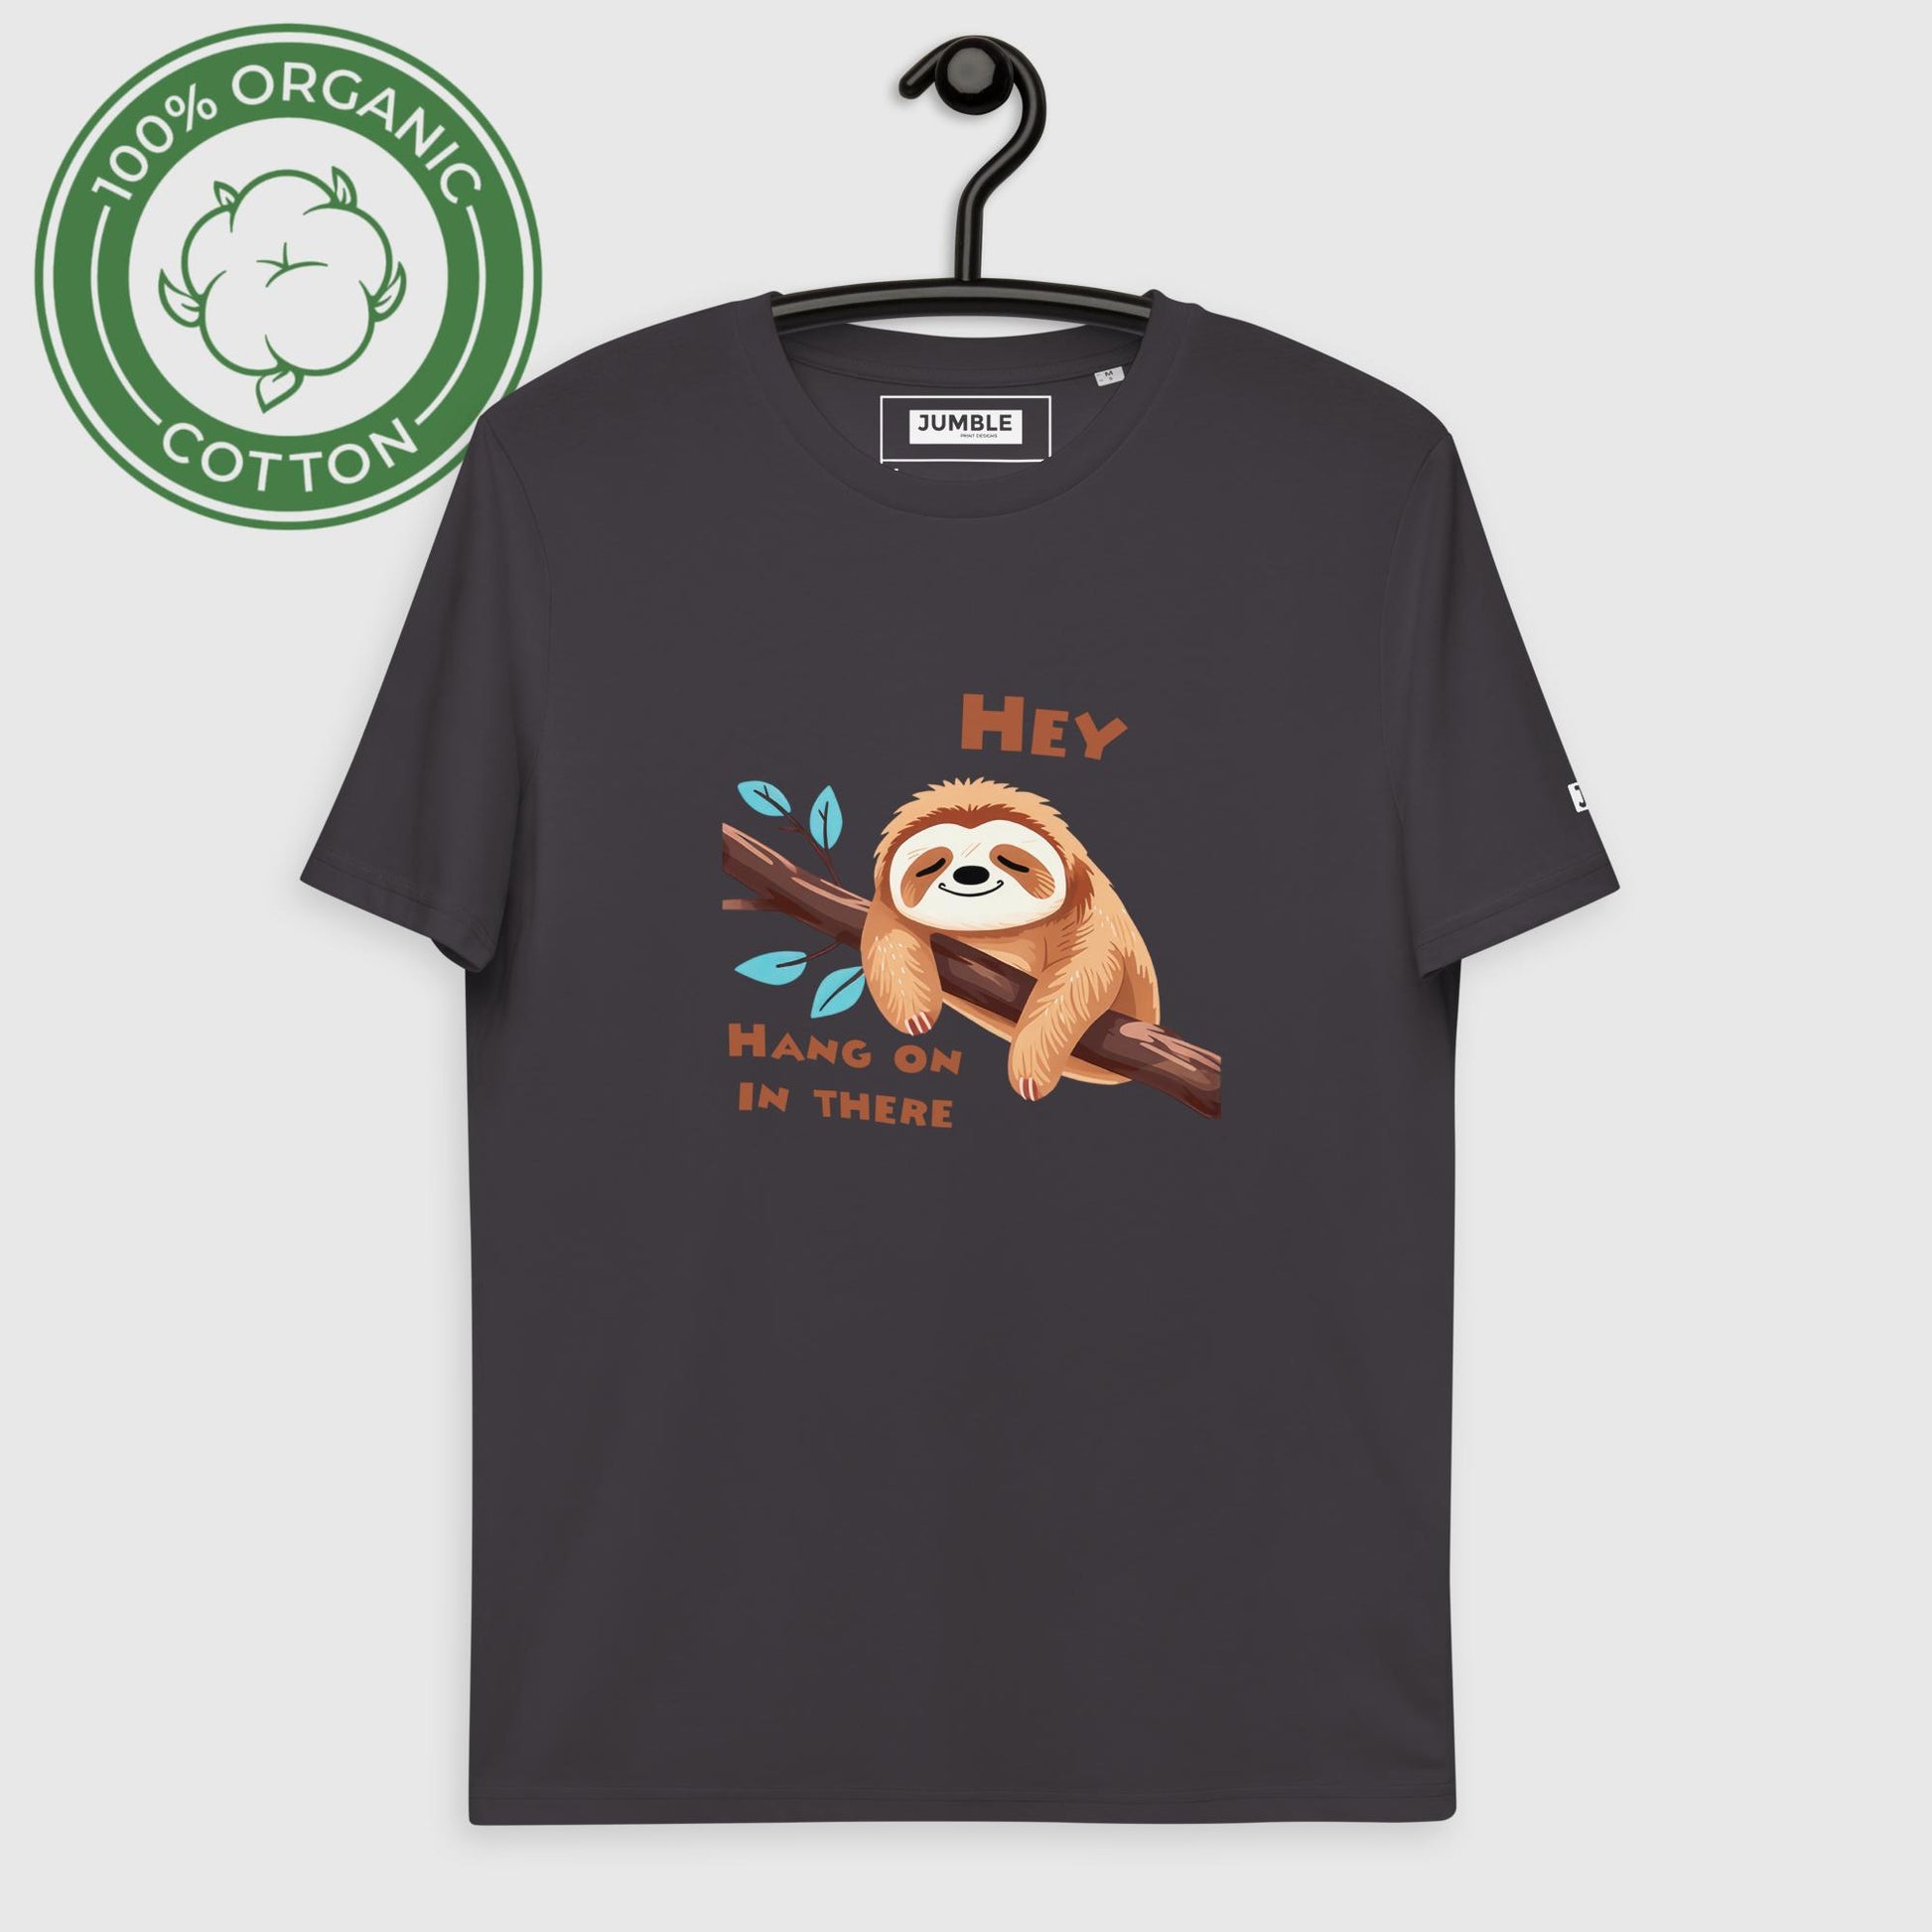 Hey, Hang on in their Unisex organic cotton t-shirt, in anthracite. On hanger